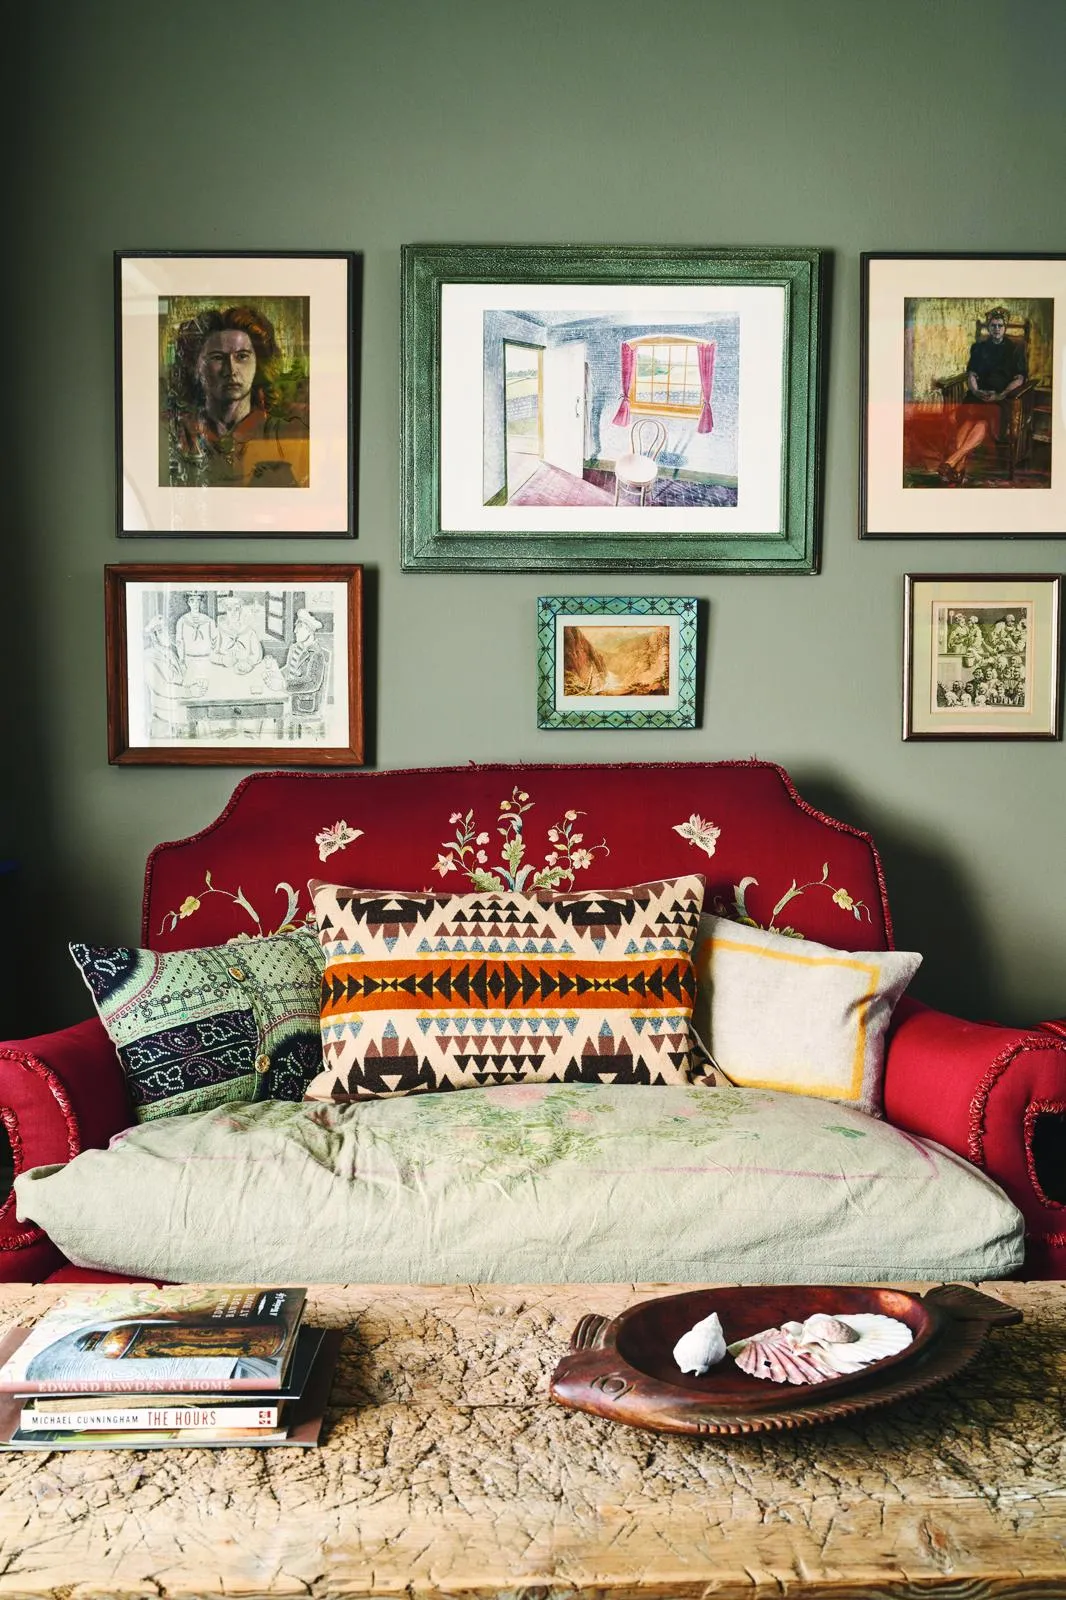 Annie Sloan's house, red sofa and artwork on the wall